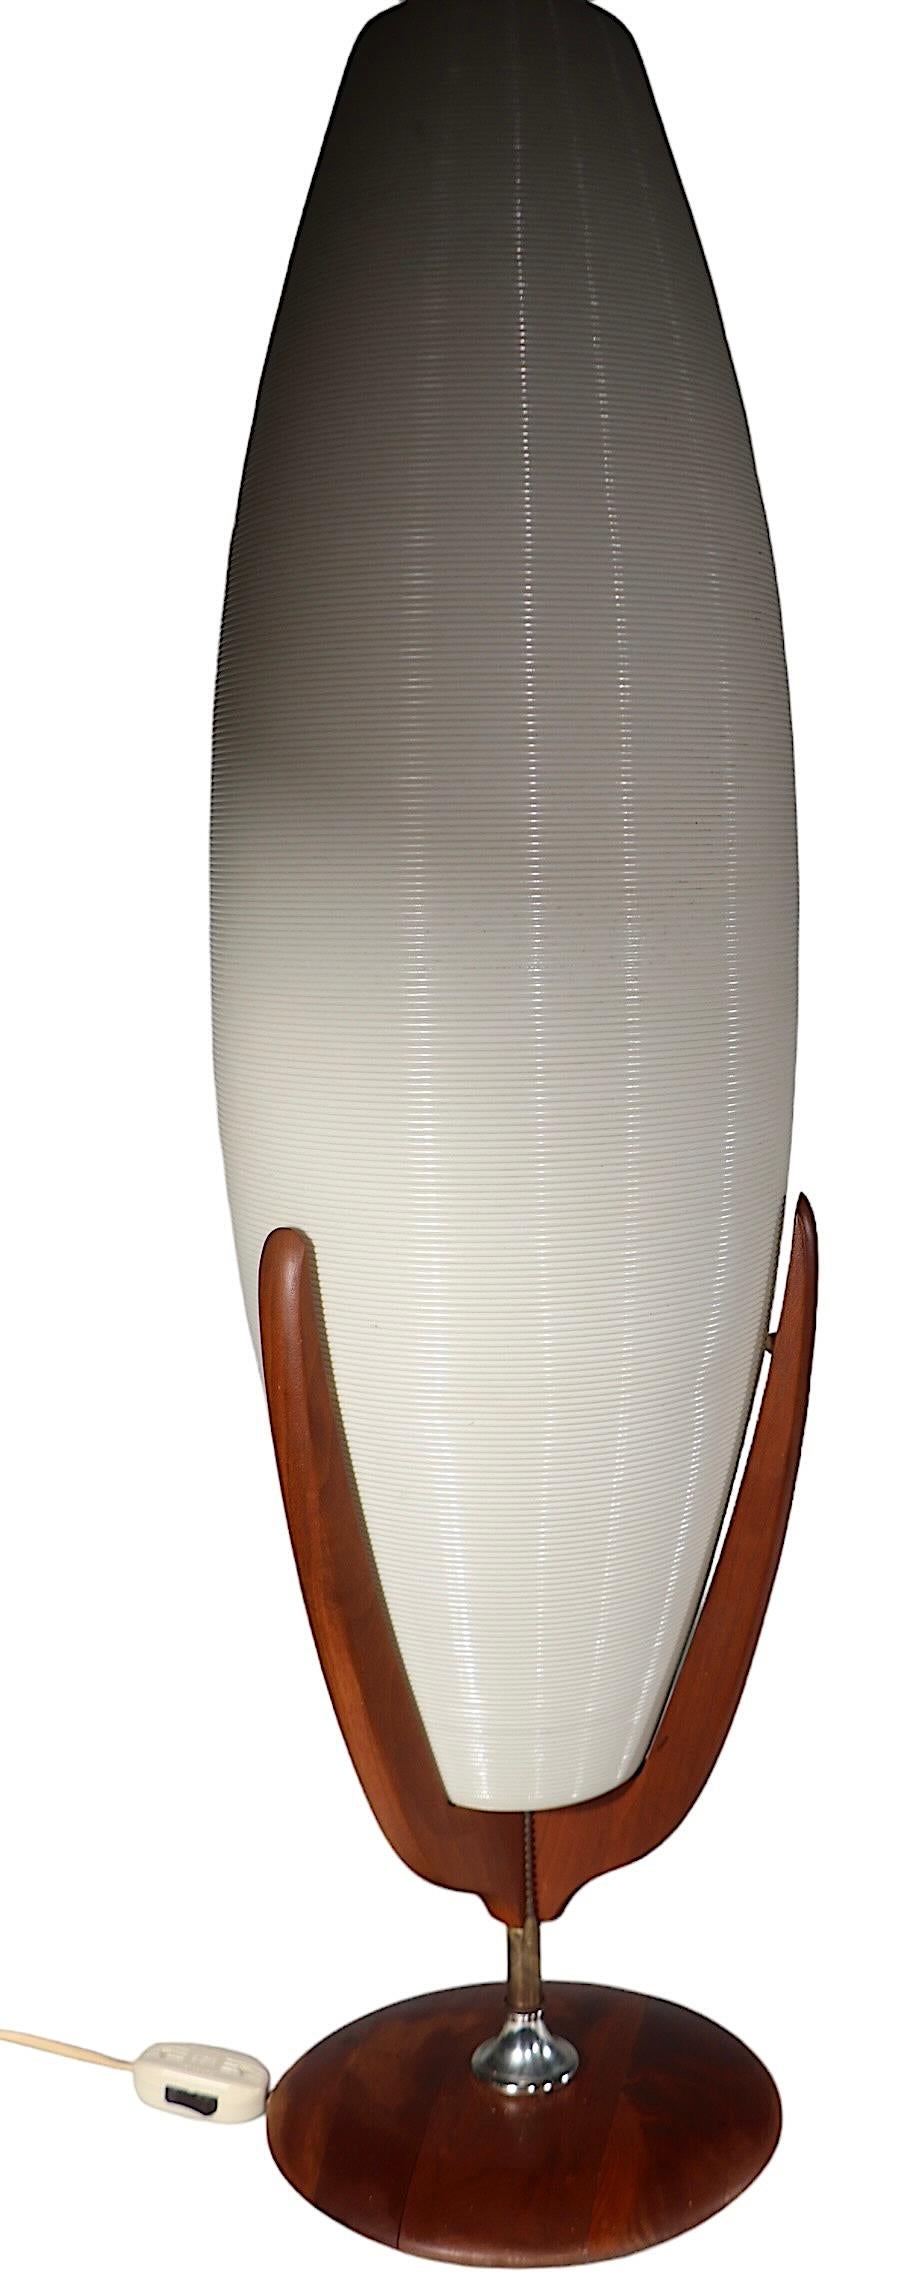 American Mid Century Rotoflex Table Lamp by Heifetz for Heifitz Manufacturing USA c 1950s For Sale